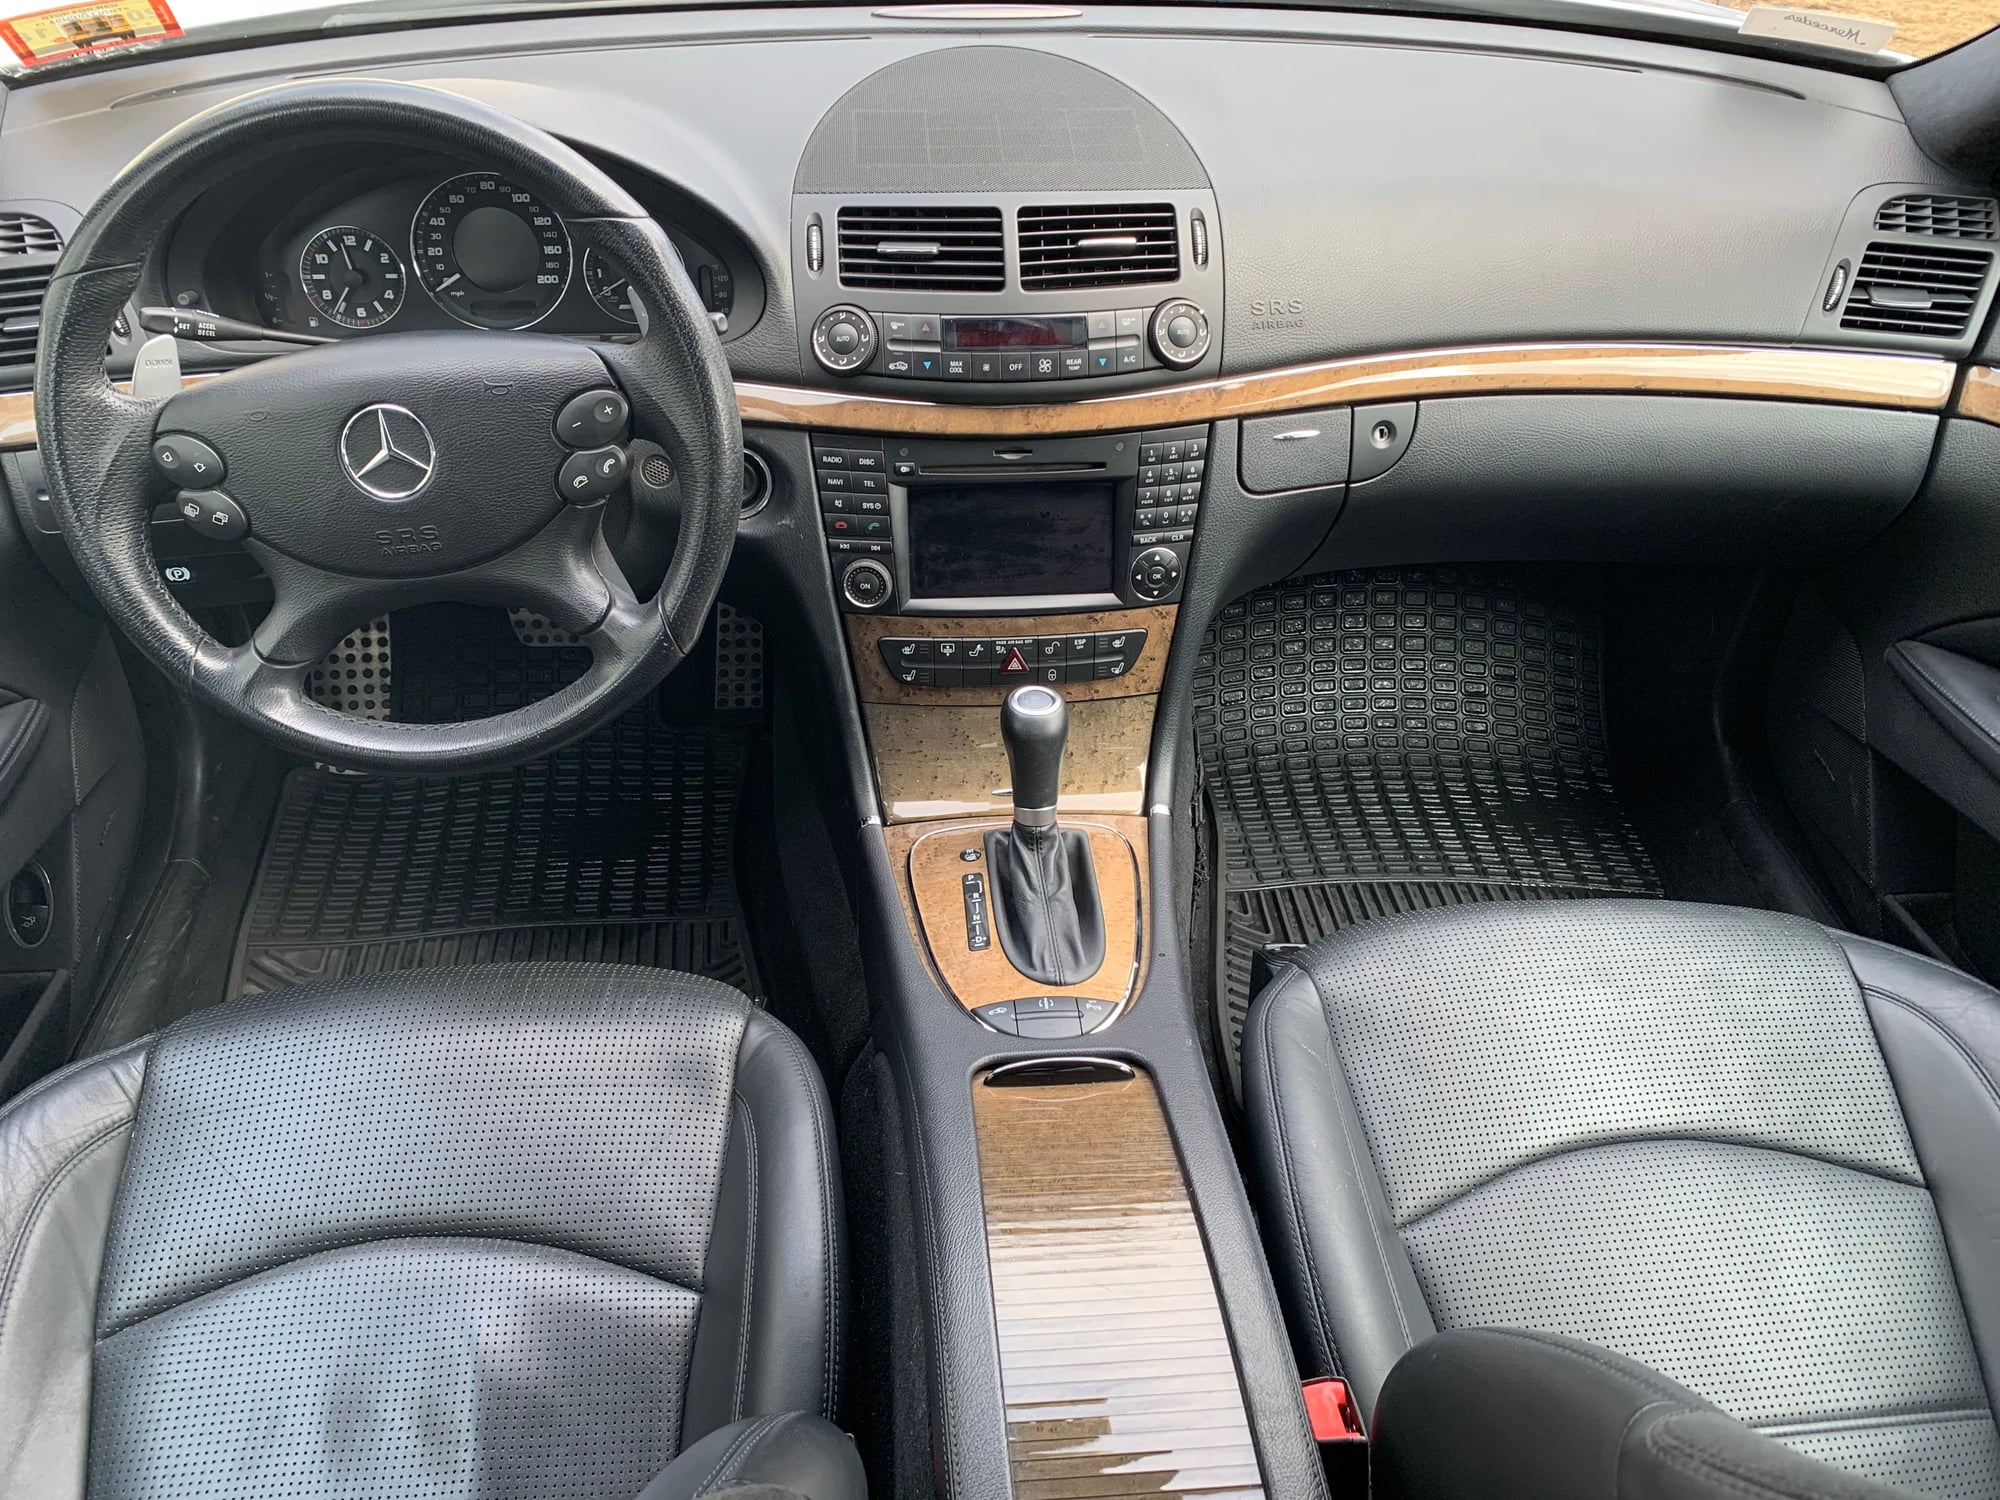 2009 Mercedes-Benz E63 AMG - 2009 AMG e63: Last/Best Year for 6.3L Motor - Used - VIN WDUF77x69b363513 - 72,000 Miles - 8 cyl - 2WD - Automatic - Sedan - Silver - Livingston, NJ 07039, United States